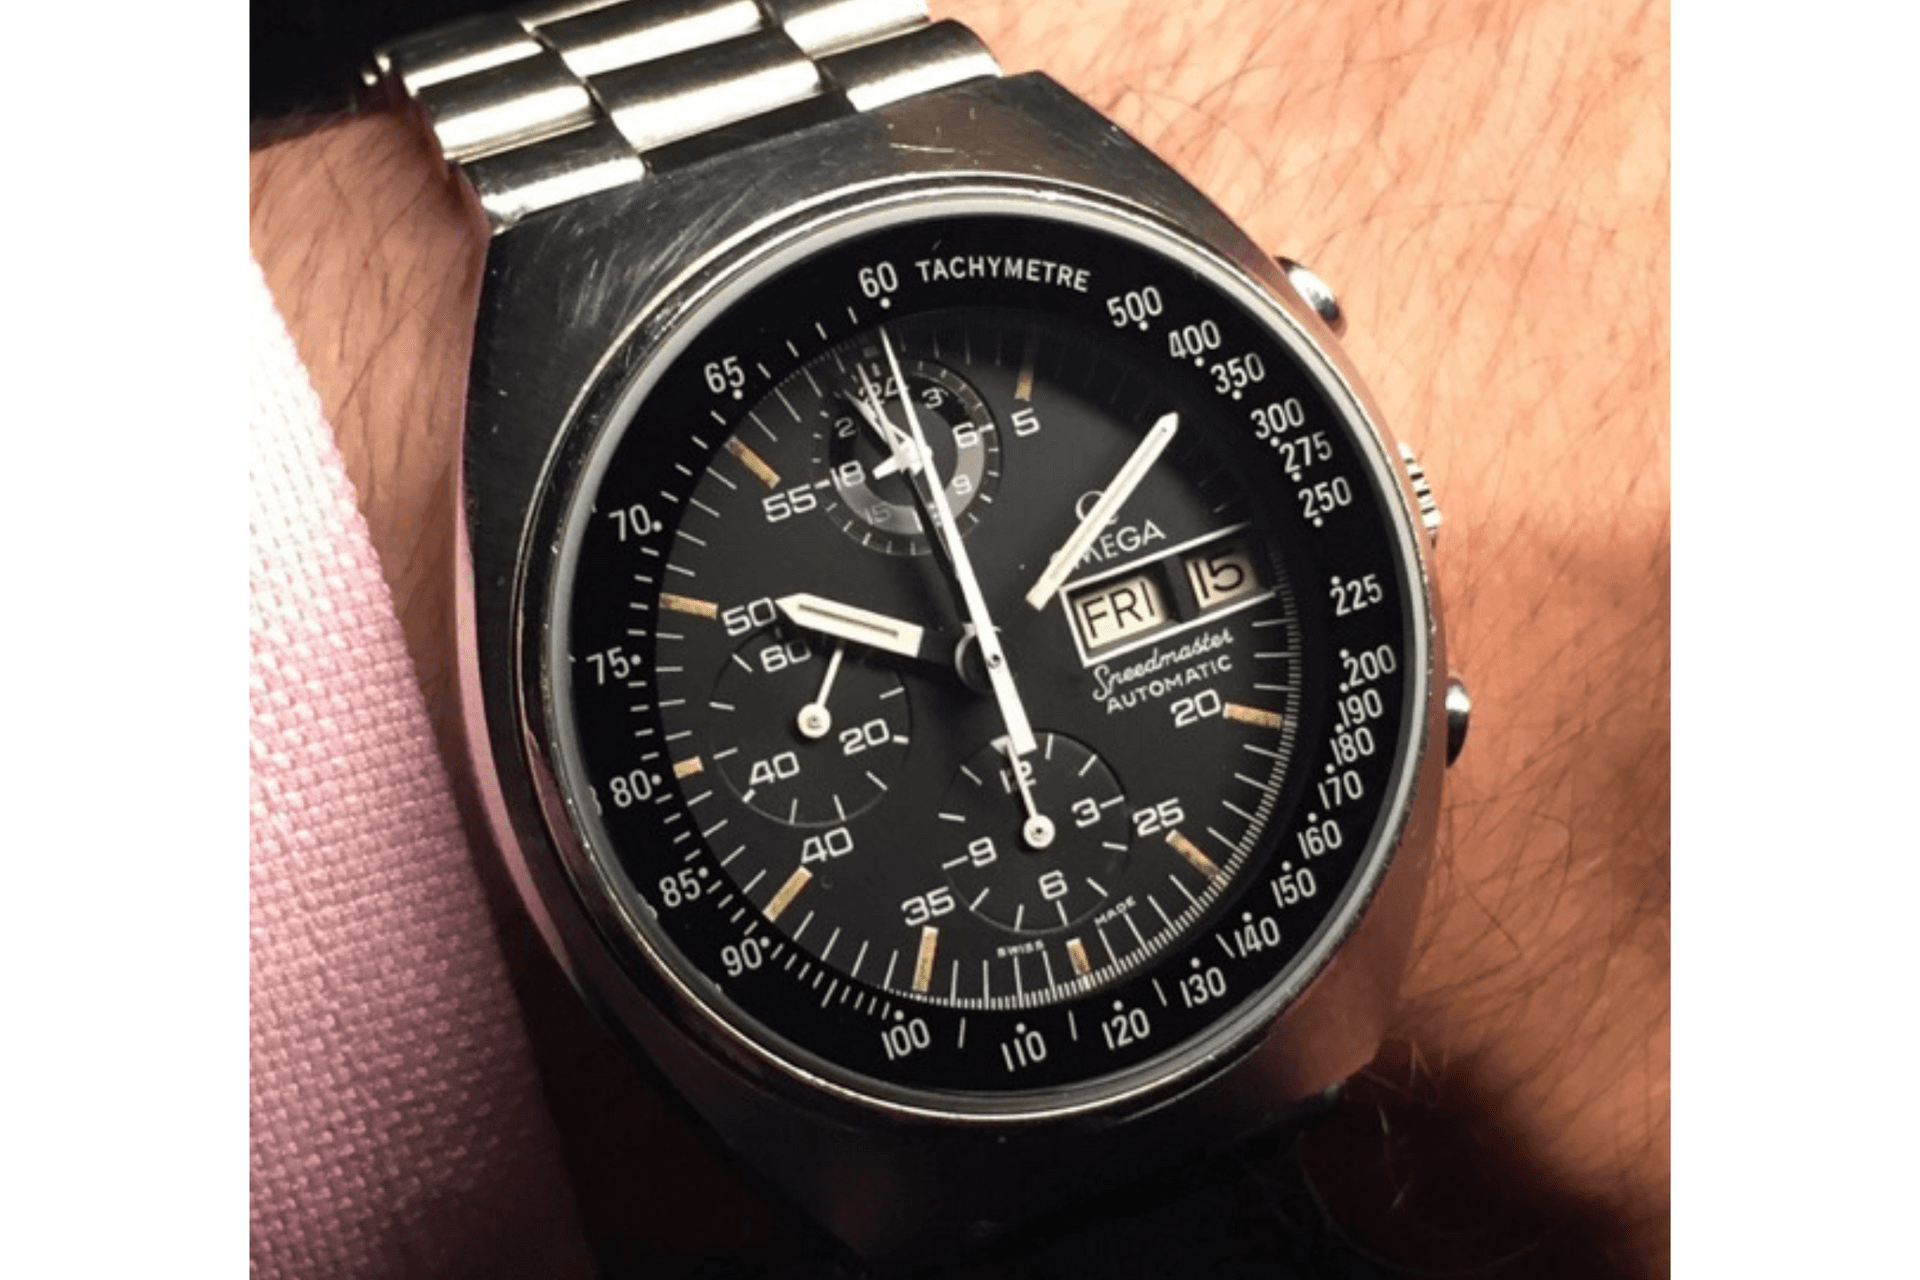 Pictured is an OMEGA Speedmaster with a George Daniels Co-Axial escapement prototype, made by George Daniels himself at his workshop Photo: WatchProSite